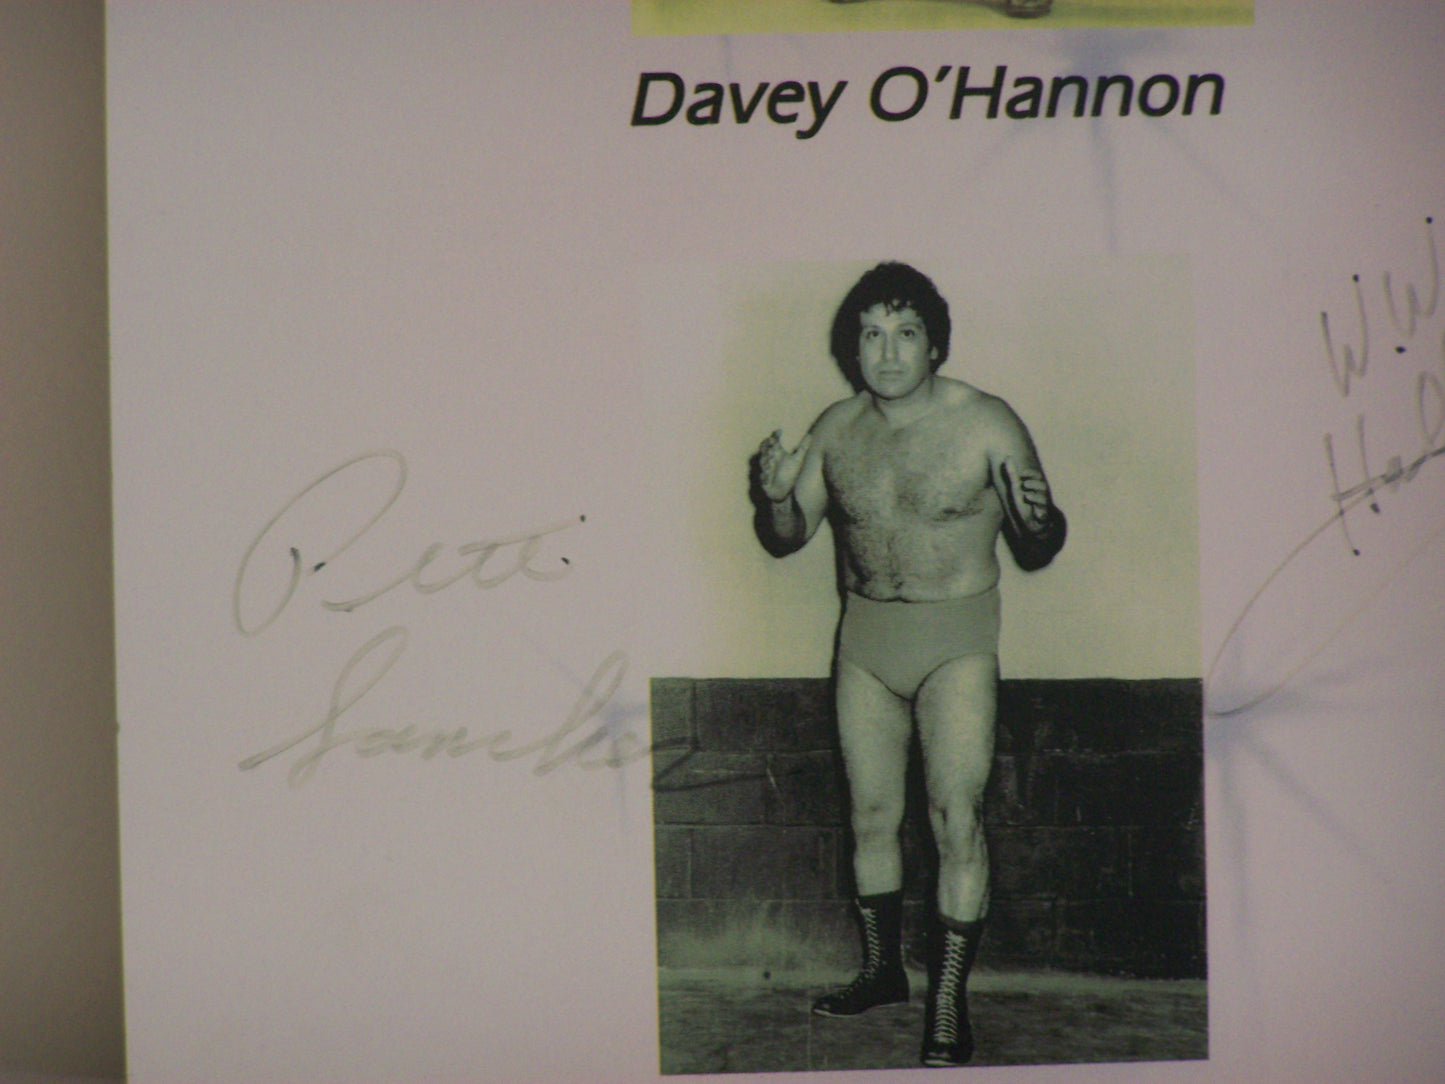 PWHF1  Pro Wrestling Hall of Fame Autographed  Poster w/COA   Davey O'Hannon , Johnny Rodz , Manny Soto , Pete Sanchez , Dick Wohrle ( Deceased )